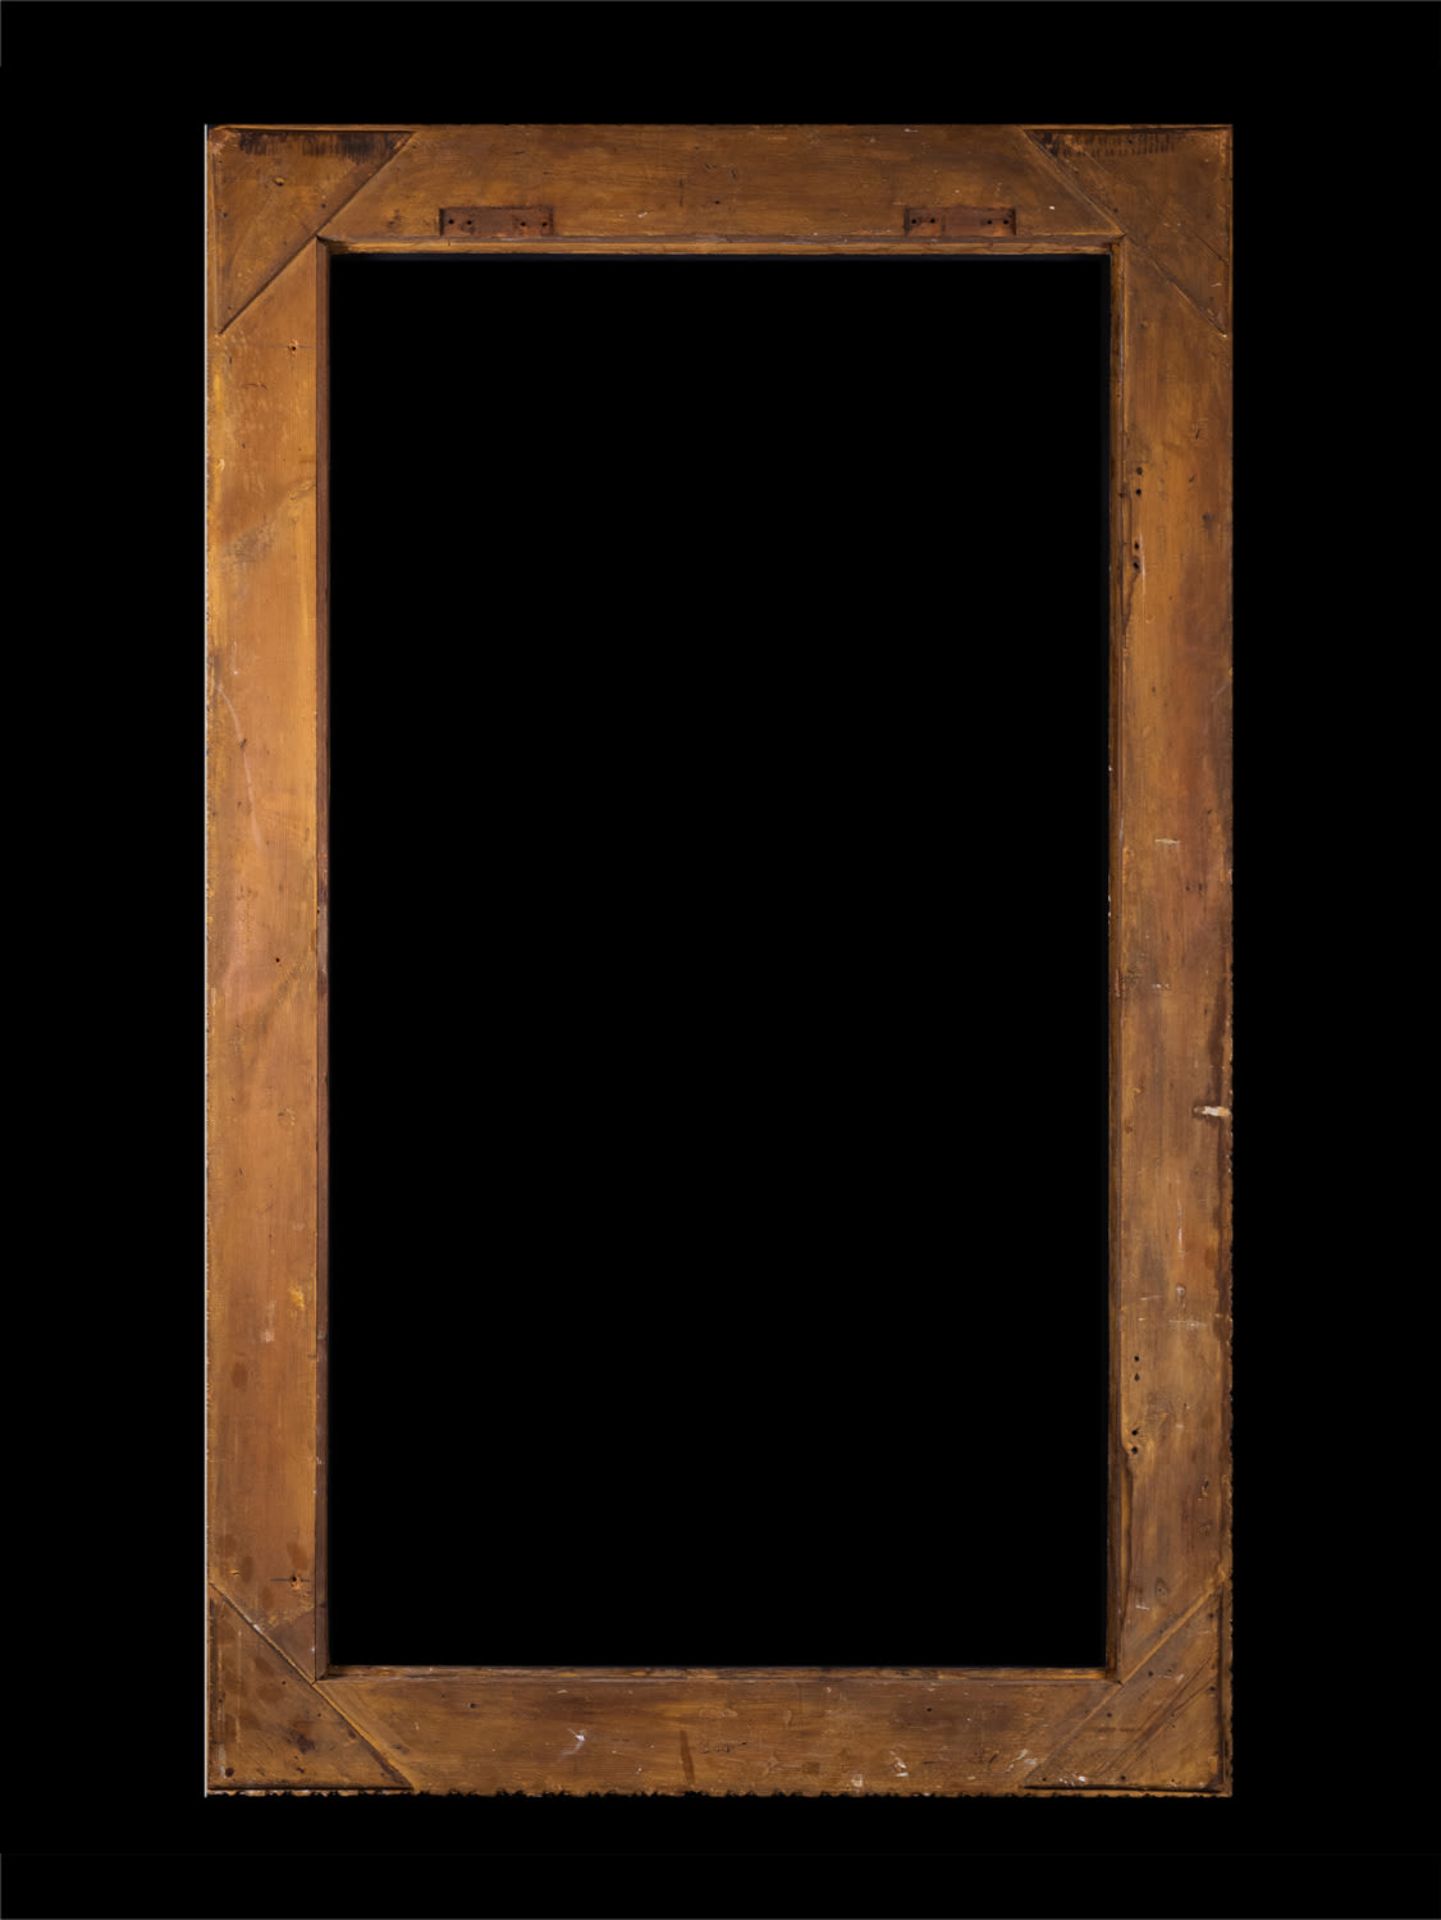 Important Baroque frame in gilt wood, 18th century - Image 2 of 4